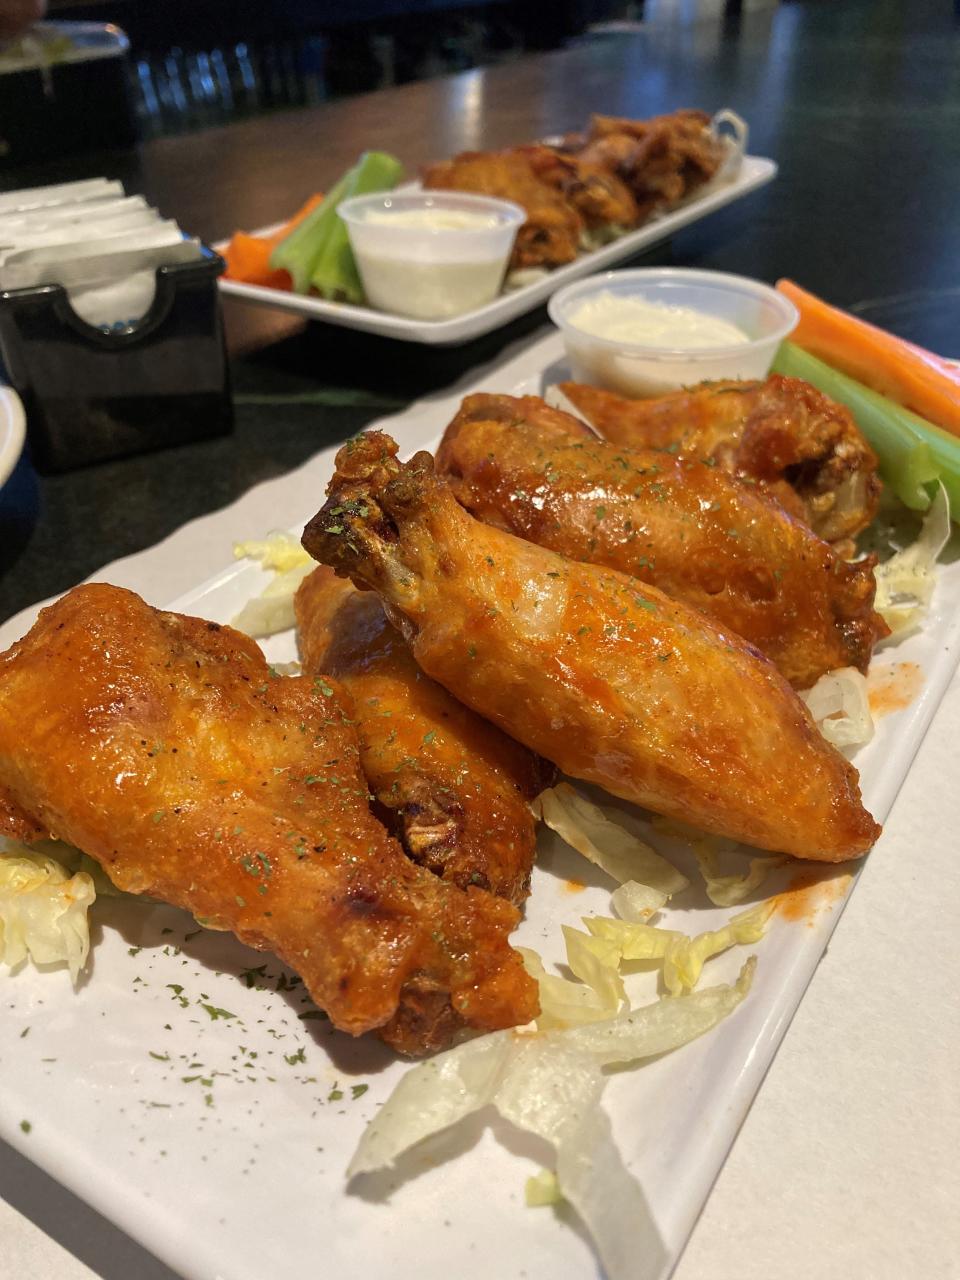 Chicken wings at Game Day Grille in Yorktown. The new sports bar has more than 16 flavors of wings. Photographed Feb. 3, 2022.